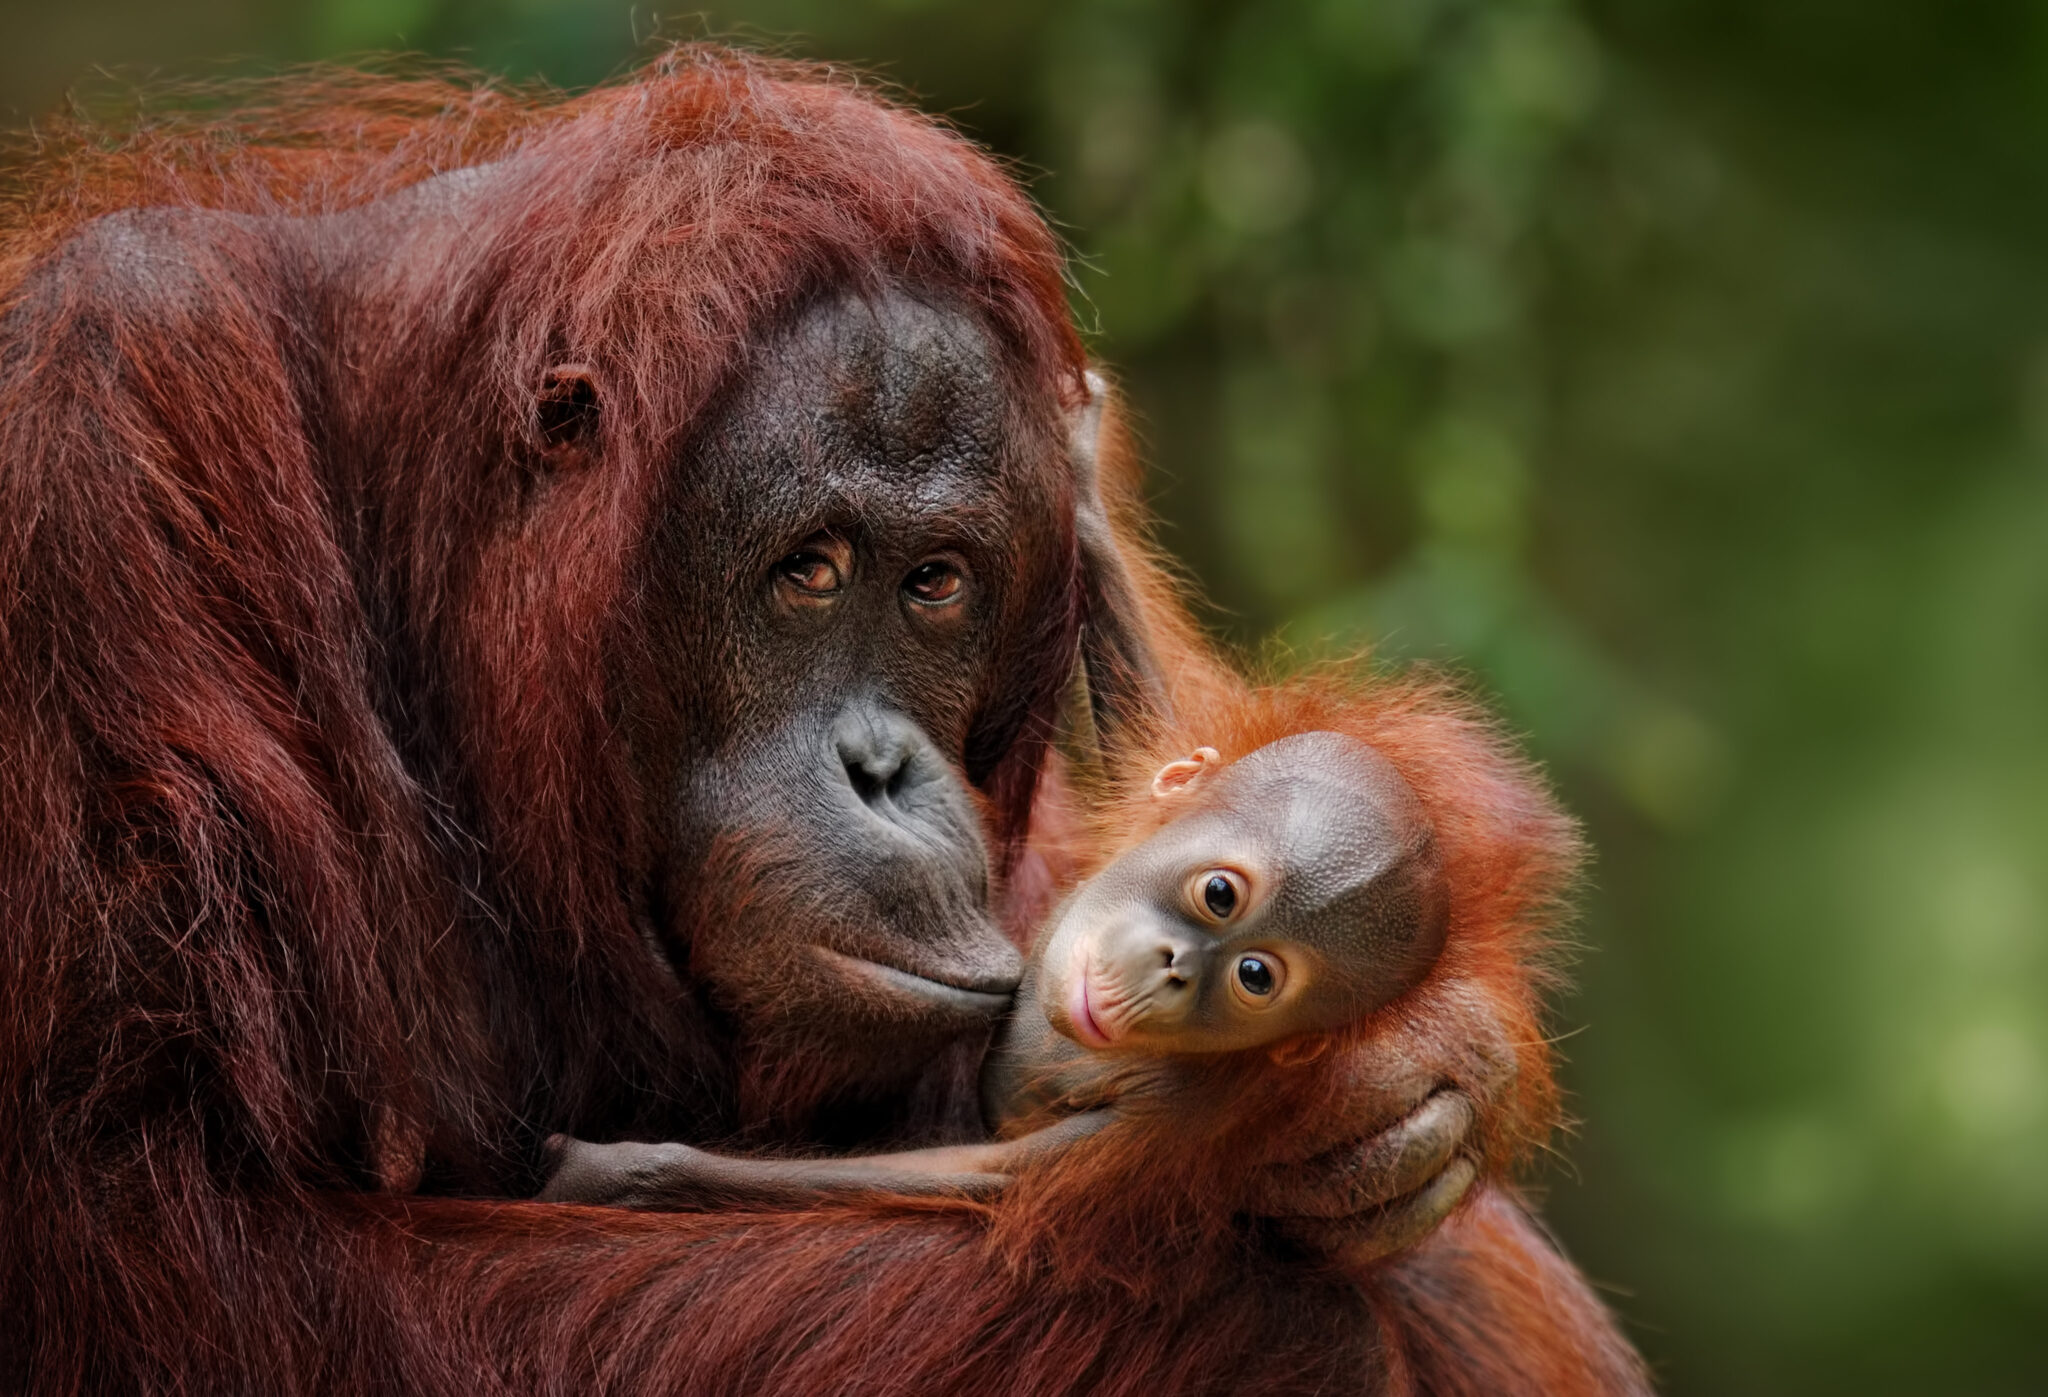 Surprising Study: Orangutans Are Only Non-Human Primates Who Can 'Talk' About the Past - EcoWatch